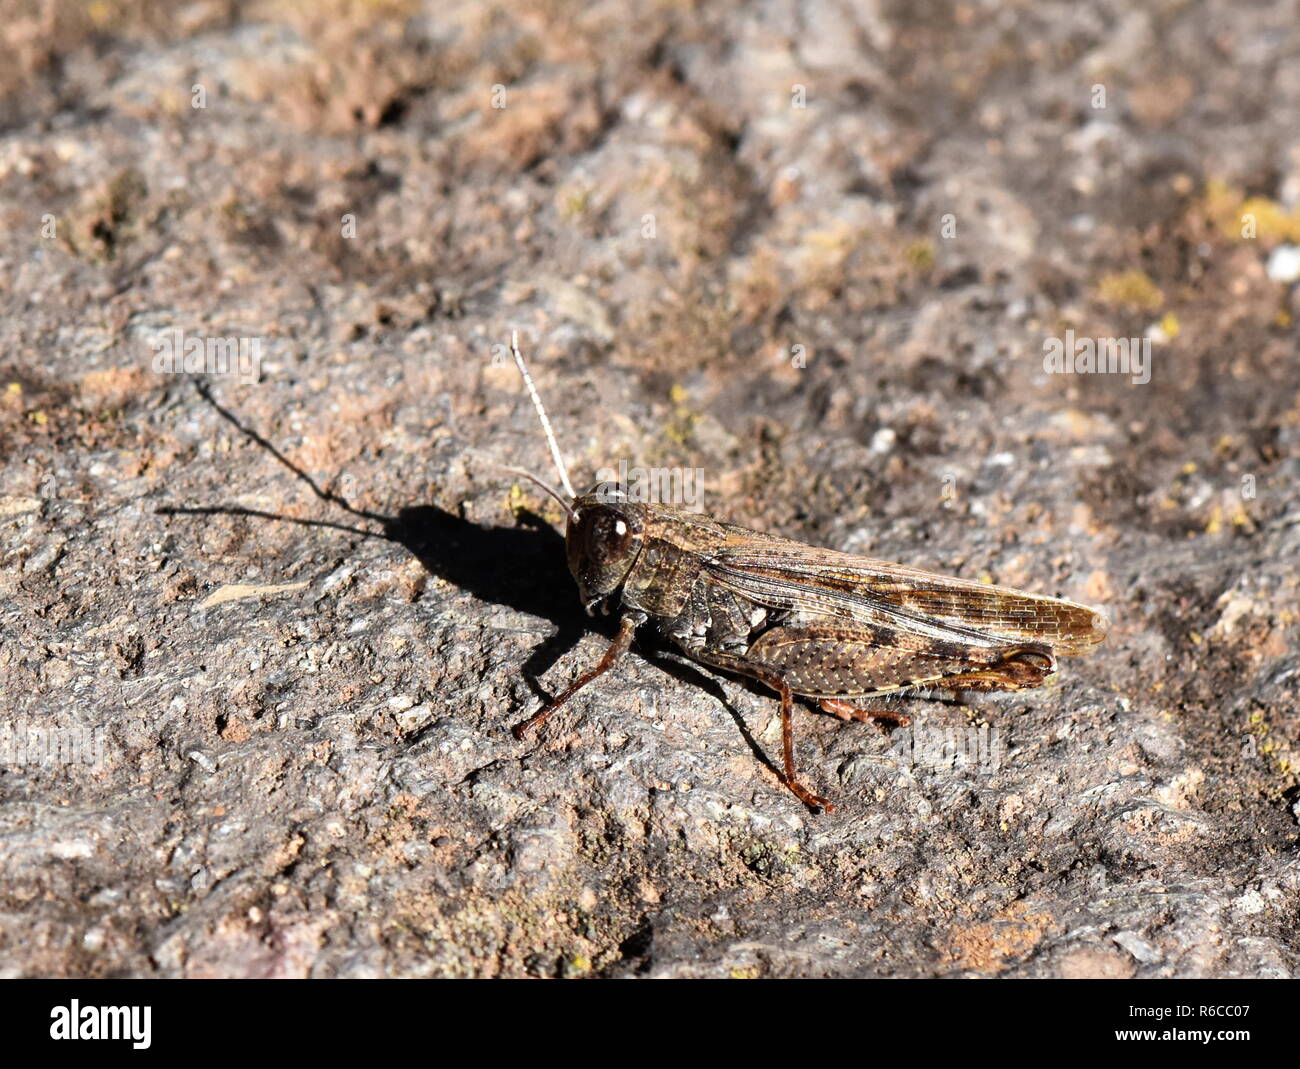 Brown grasshopper sitting on a brown stone Stock Photo